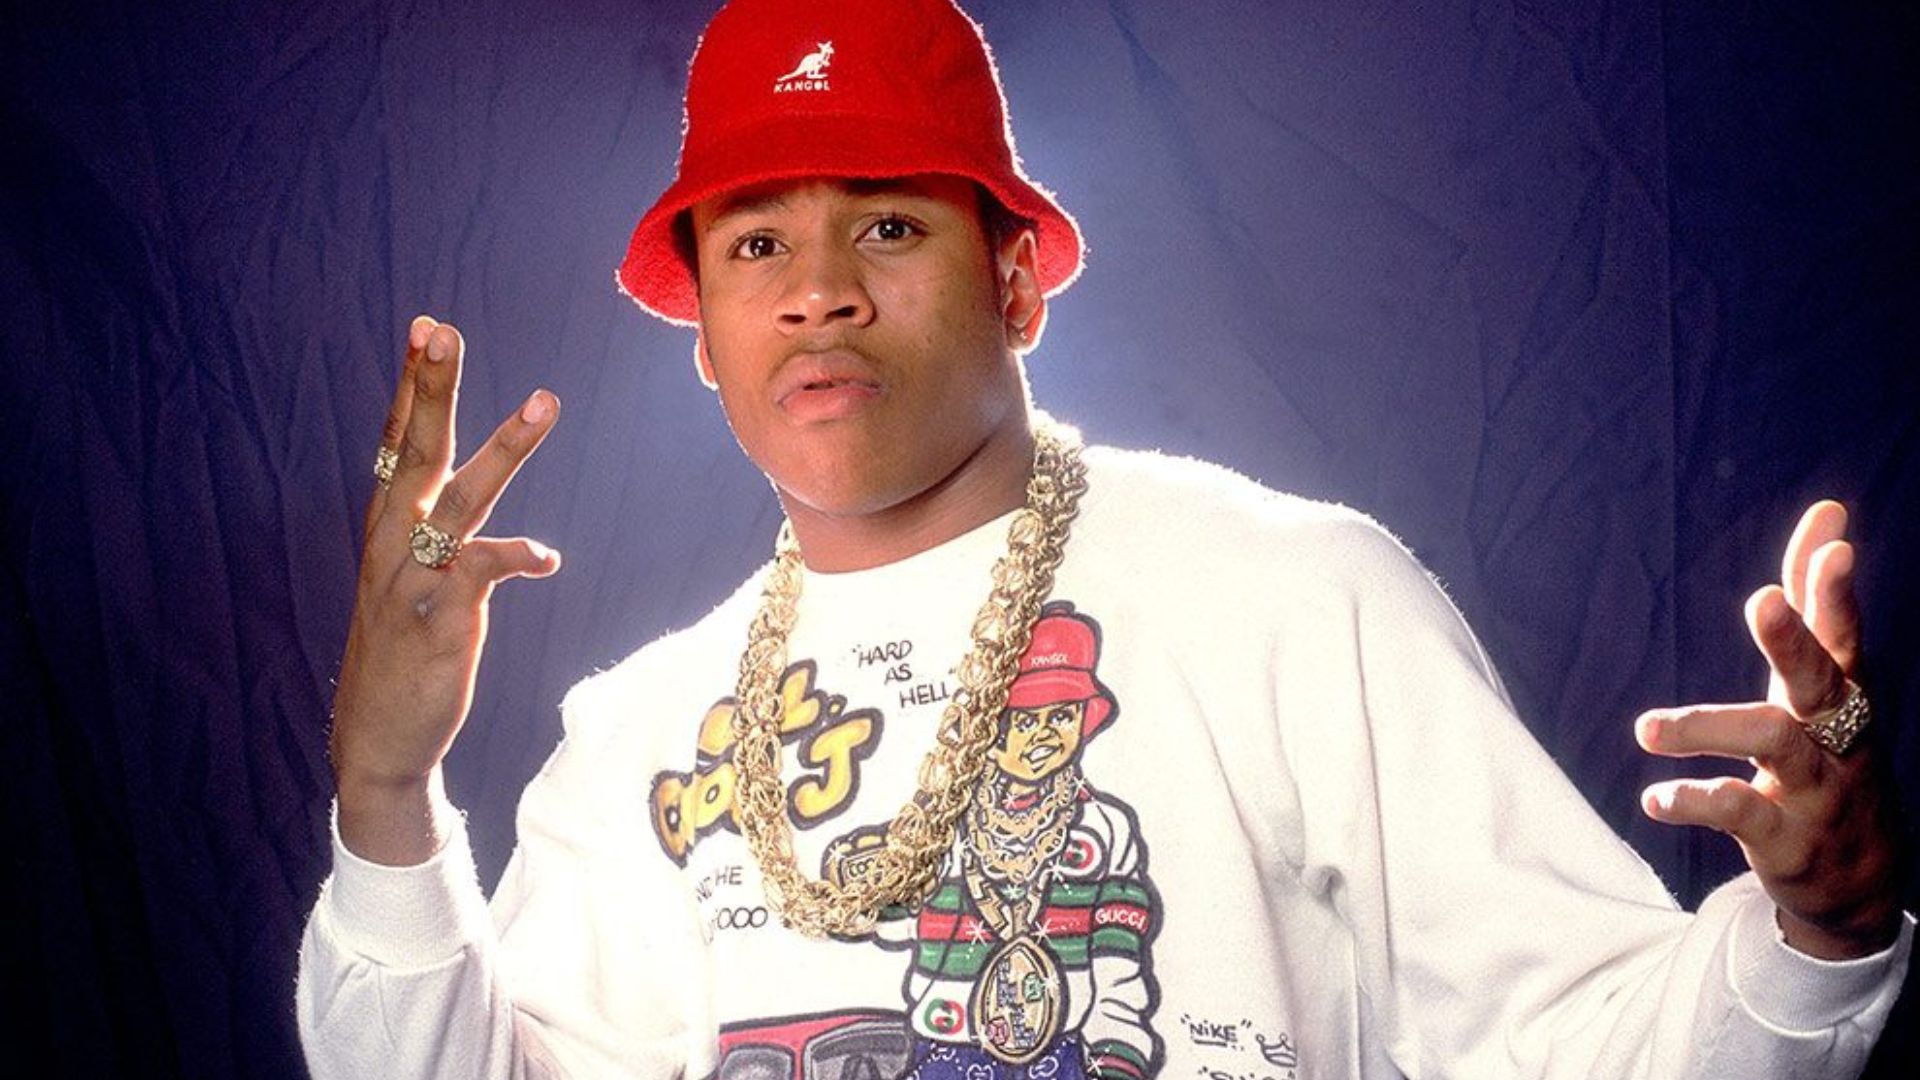 LL Cool J Doing The Cool Signs